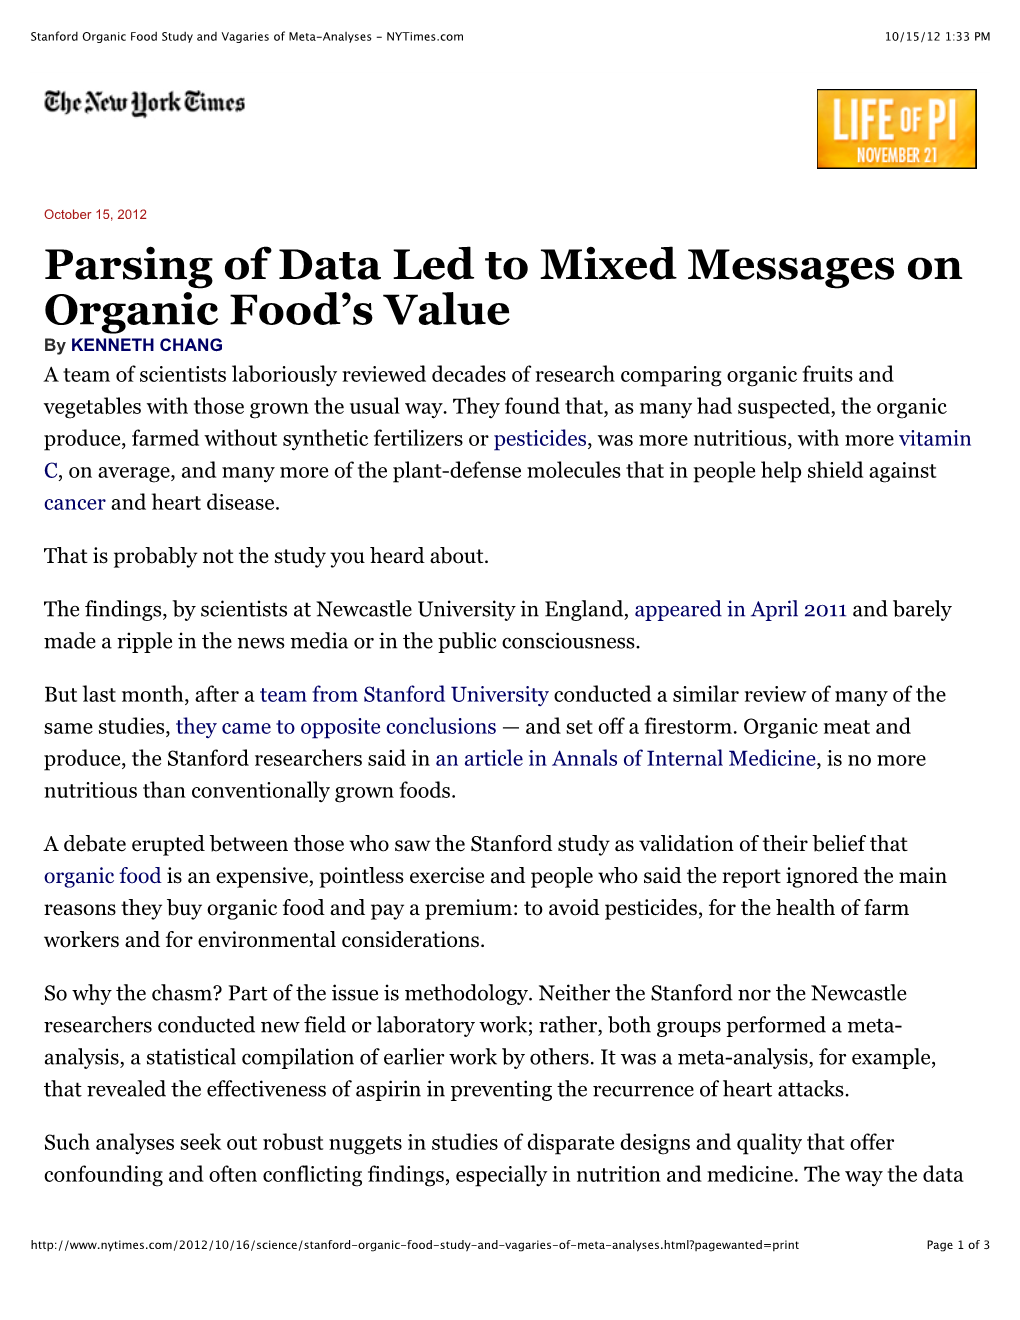 Parsing of Data Led to Mixed Messages on Organic Food's Value